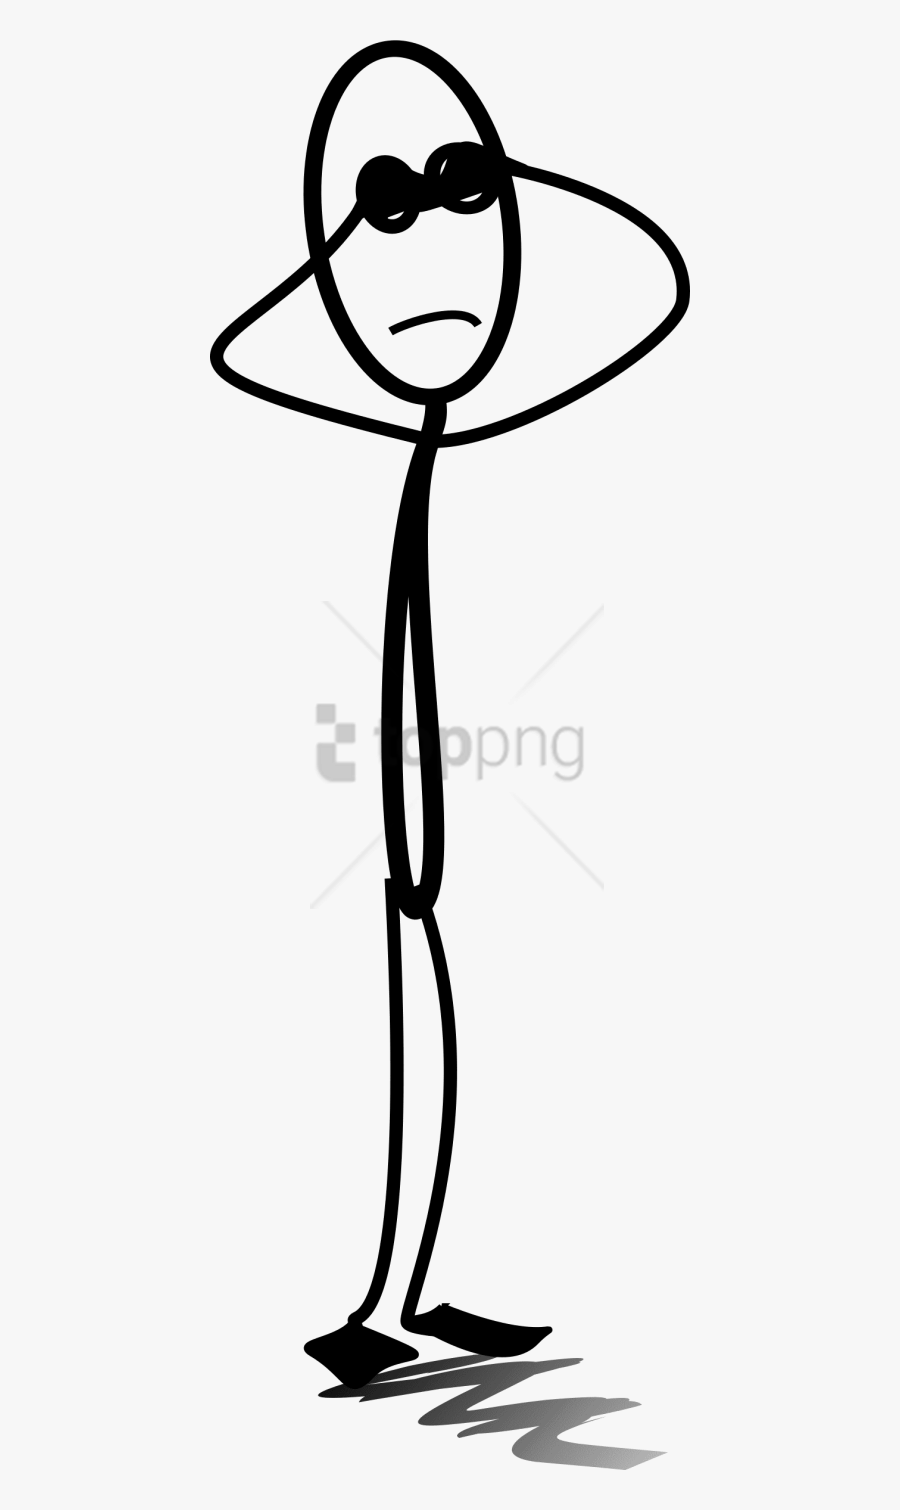 Free Png Stick Figure Looking Up Png Image With Transparent - Stickman Png, Transparent Clipart